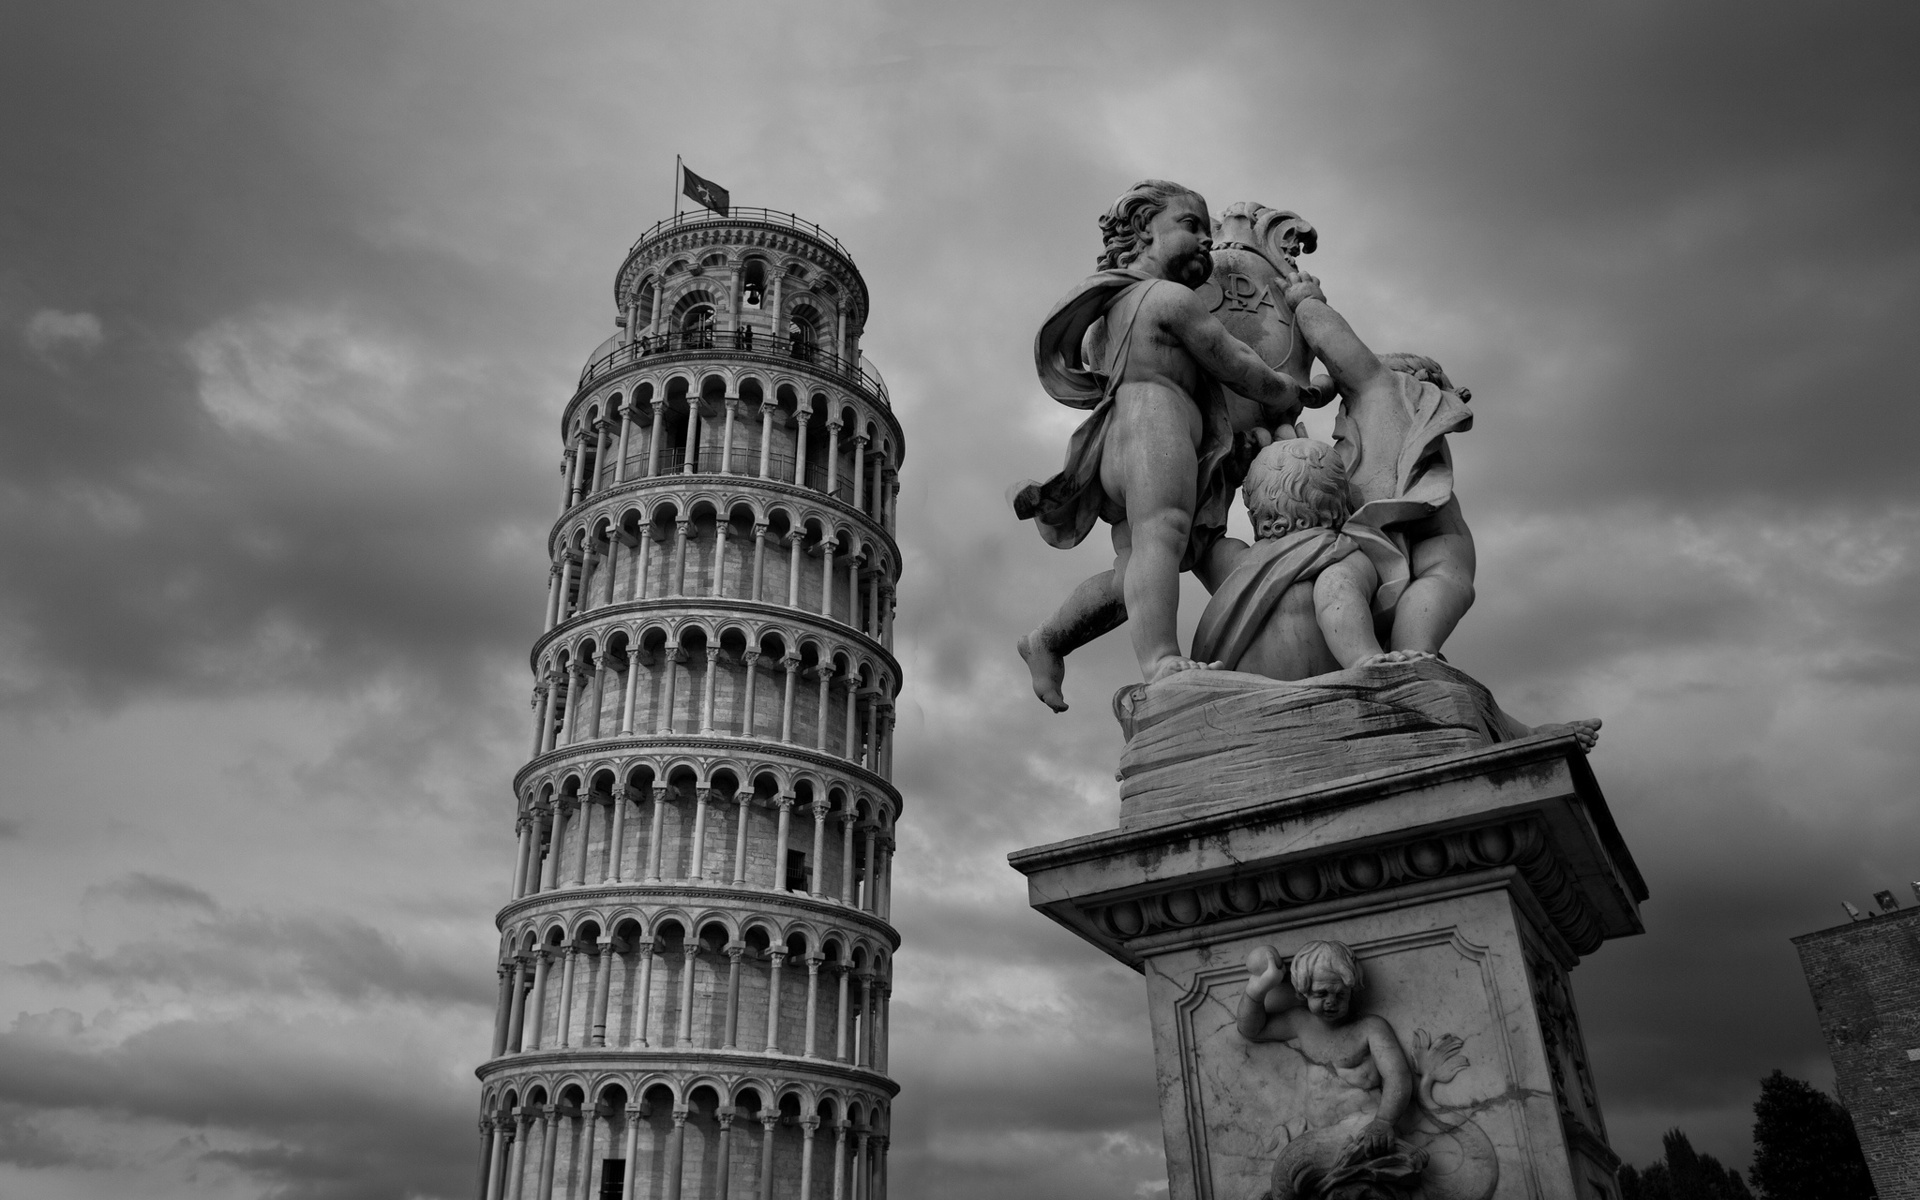 leaning, Tower, Of, Pisa, Italy, Monument, Statue, Black, White, Tower, Architecture, Buildings, Artistic, Angels, Babies, Children, Sky, Clouds, Tourist, History Wallpaper